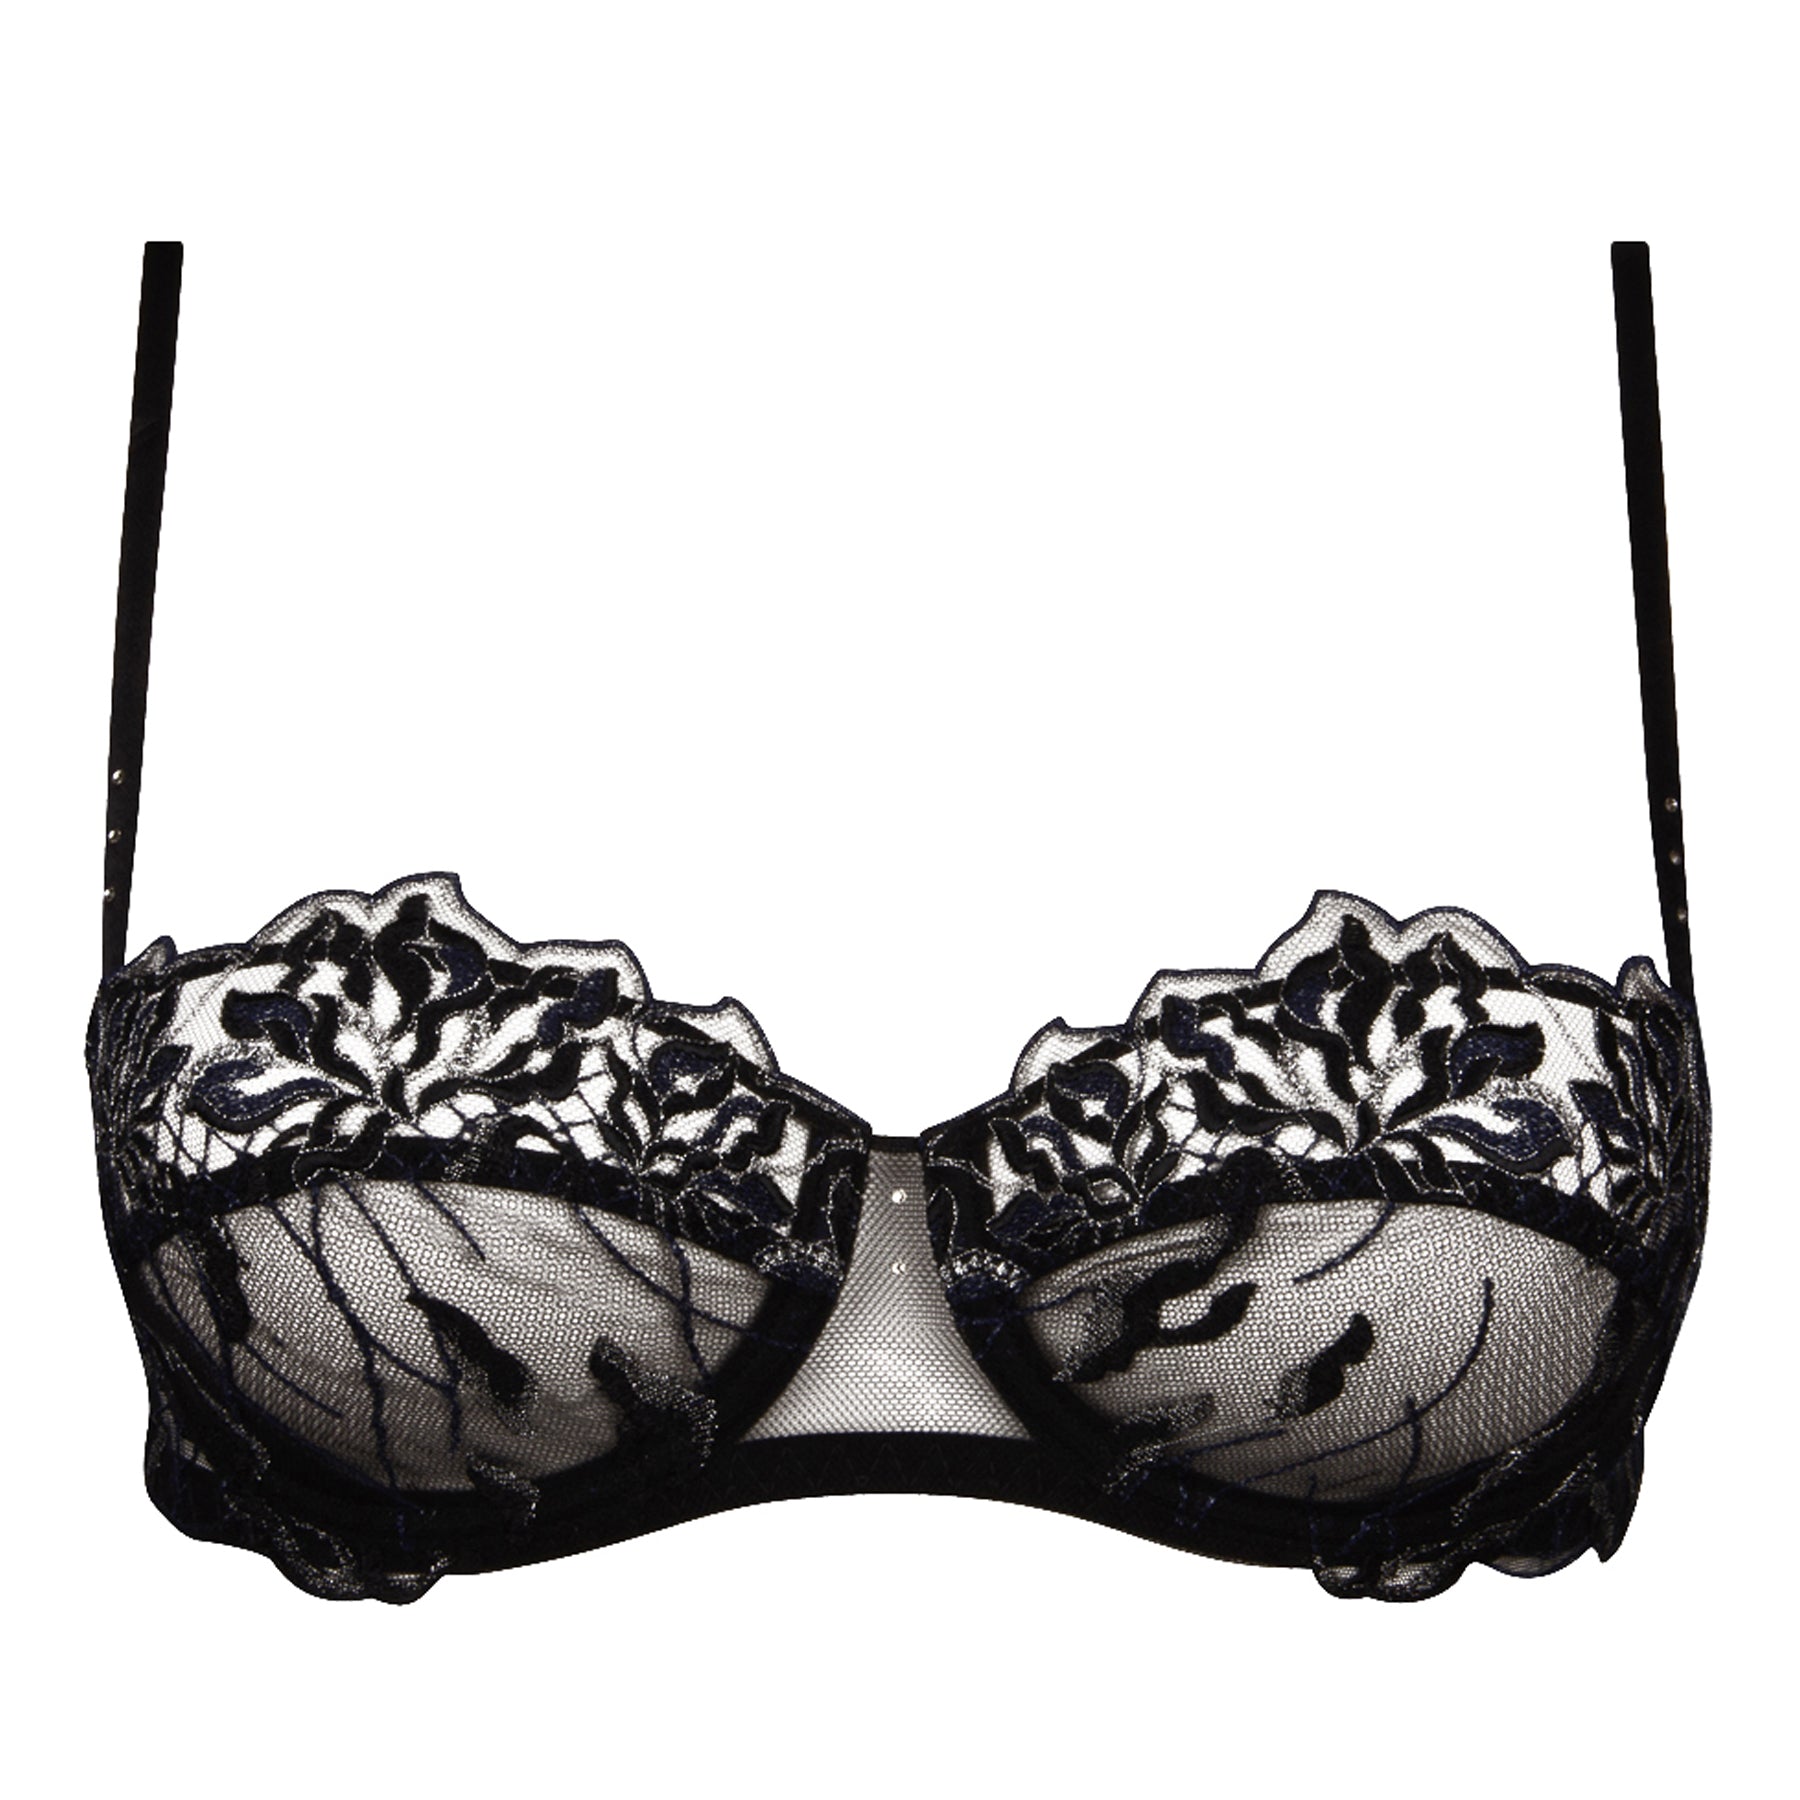 Lise Charmel Feerie Couture Scalloped Lace Demi Bra in Black